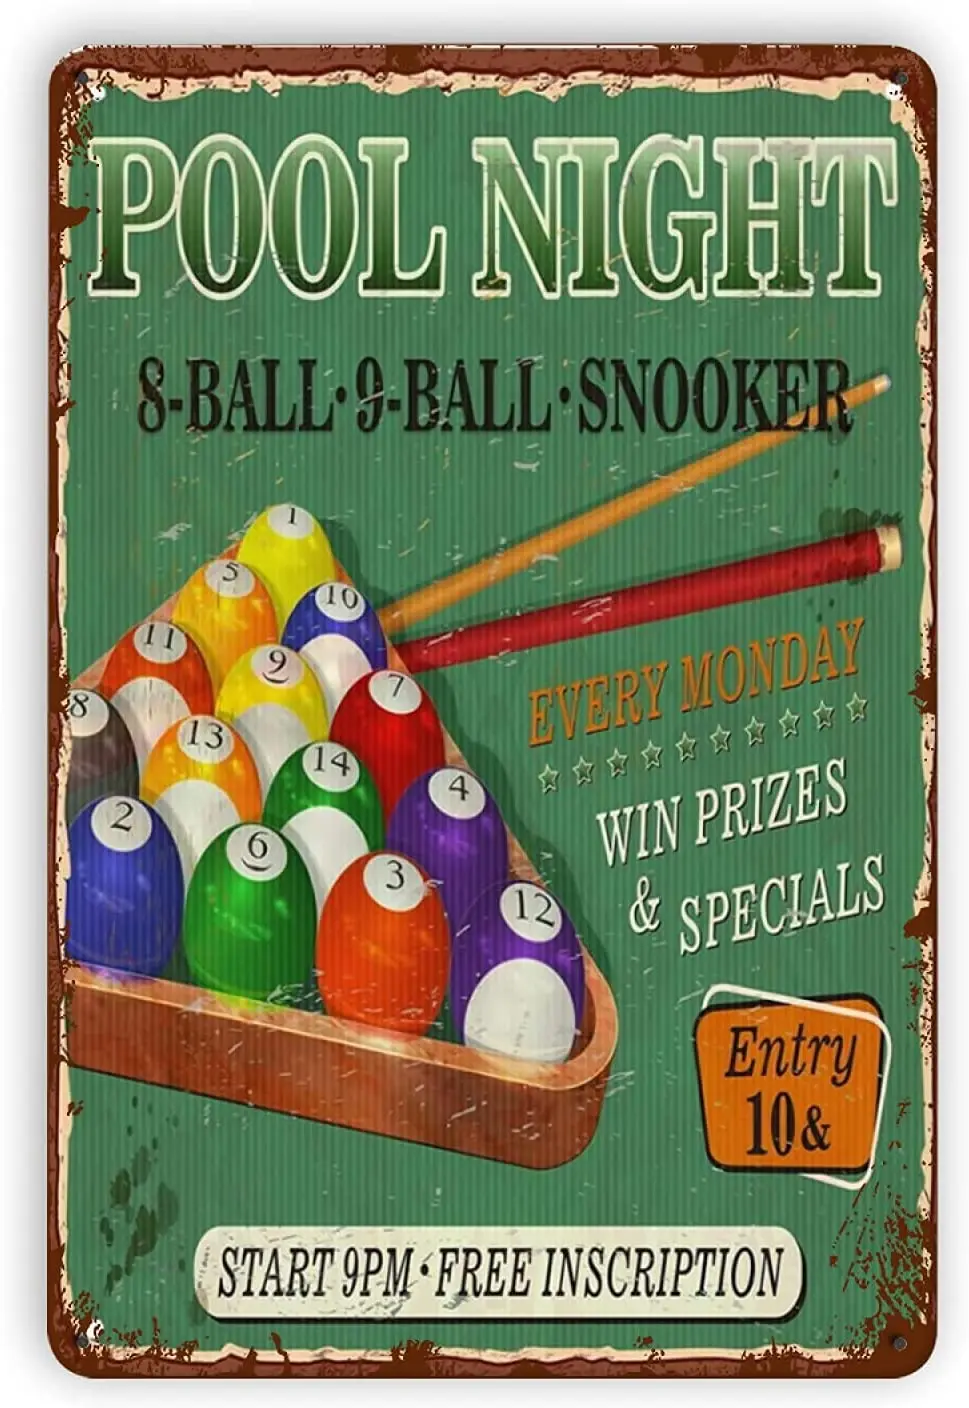 

Billiards poker Club Vintage Metal Sign Pool Billiards Balls Poster Tin Sign Home Family Gift Funny Metal Signs Wall Decor 12x8